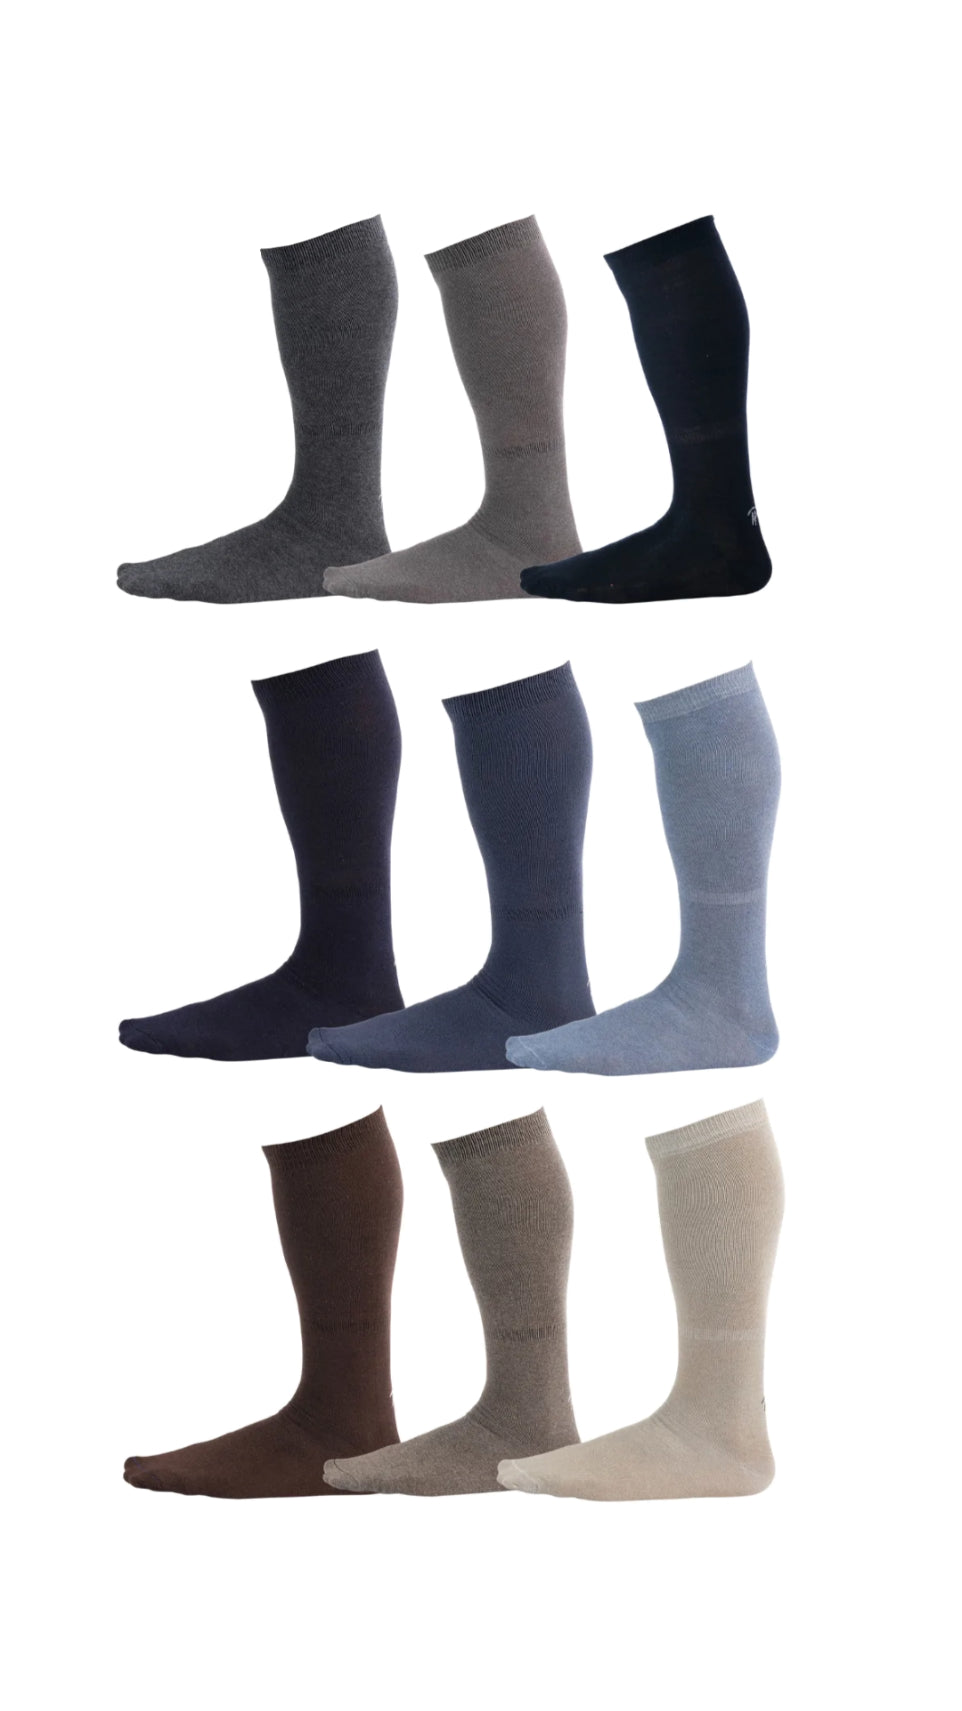 Black, blue, and brown pairs of Pierre Henry Over the Calf Dress Socks